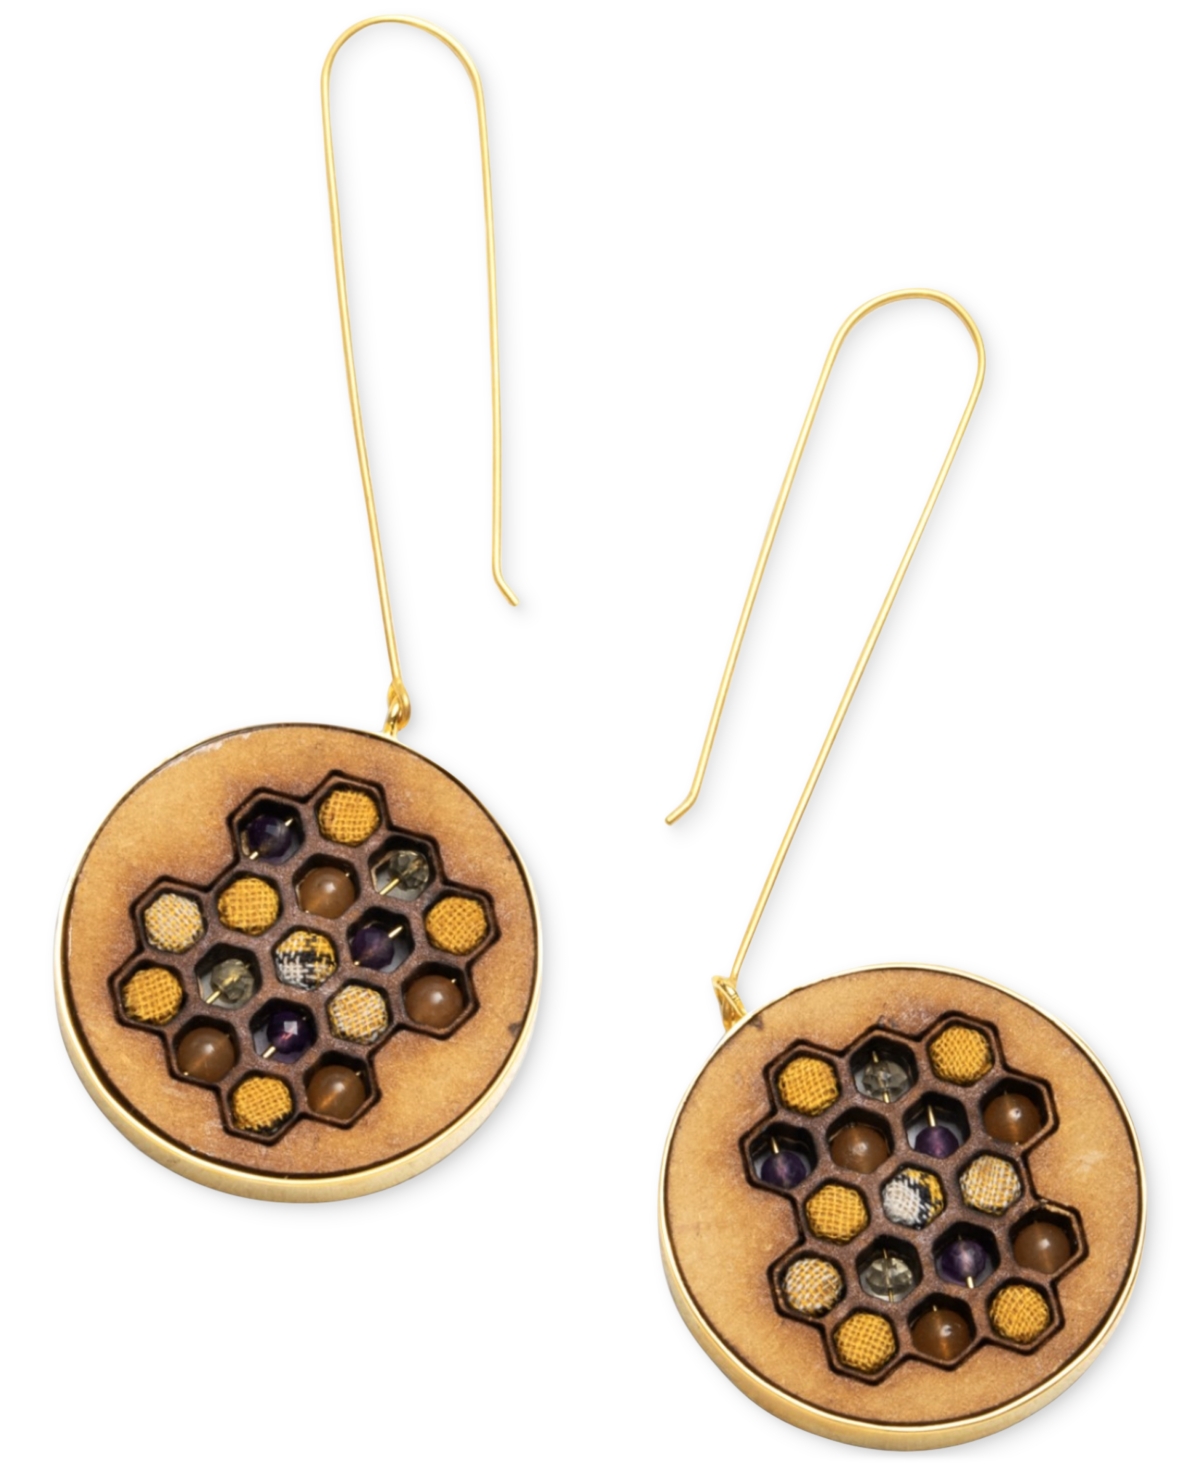 18k Gold-Plated Mixed Gemstone Honeycomb Drop Earrings - Yw Gld